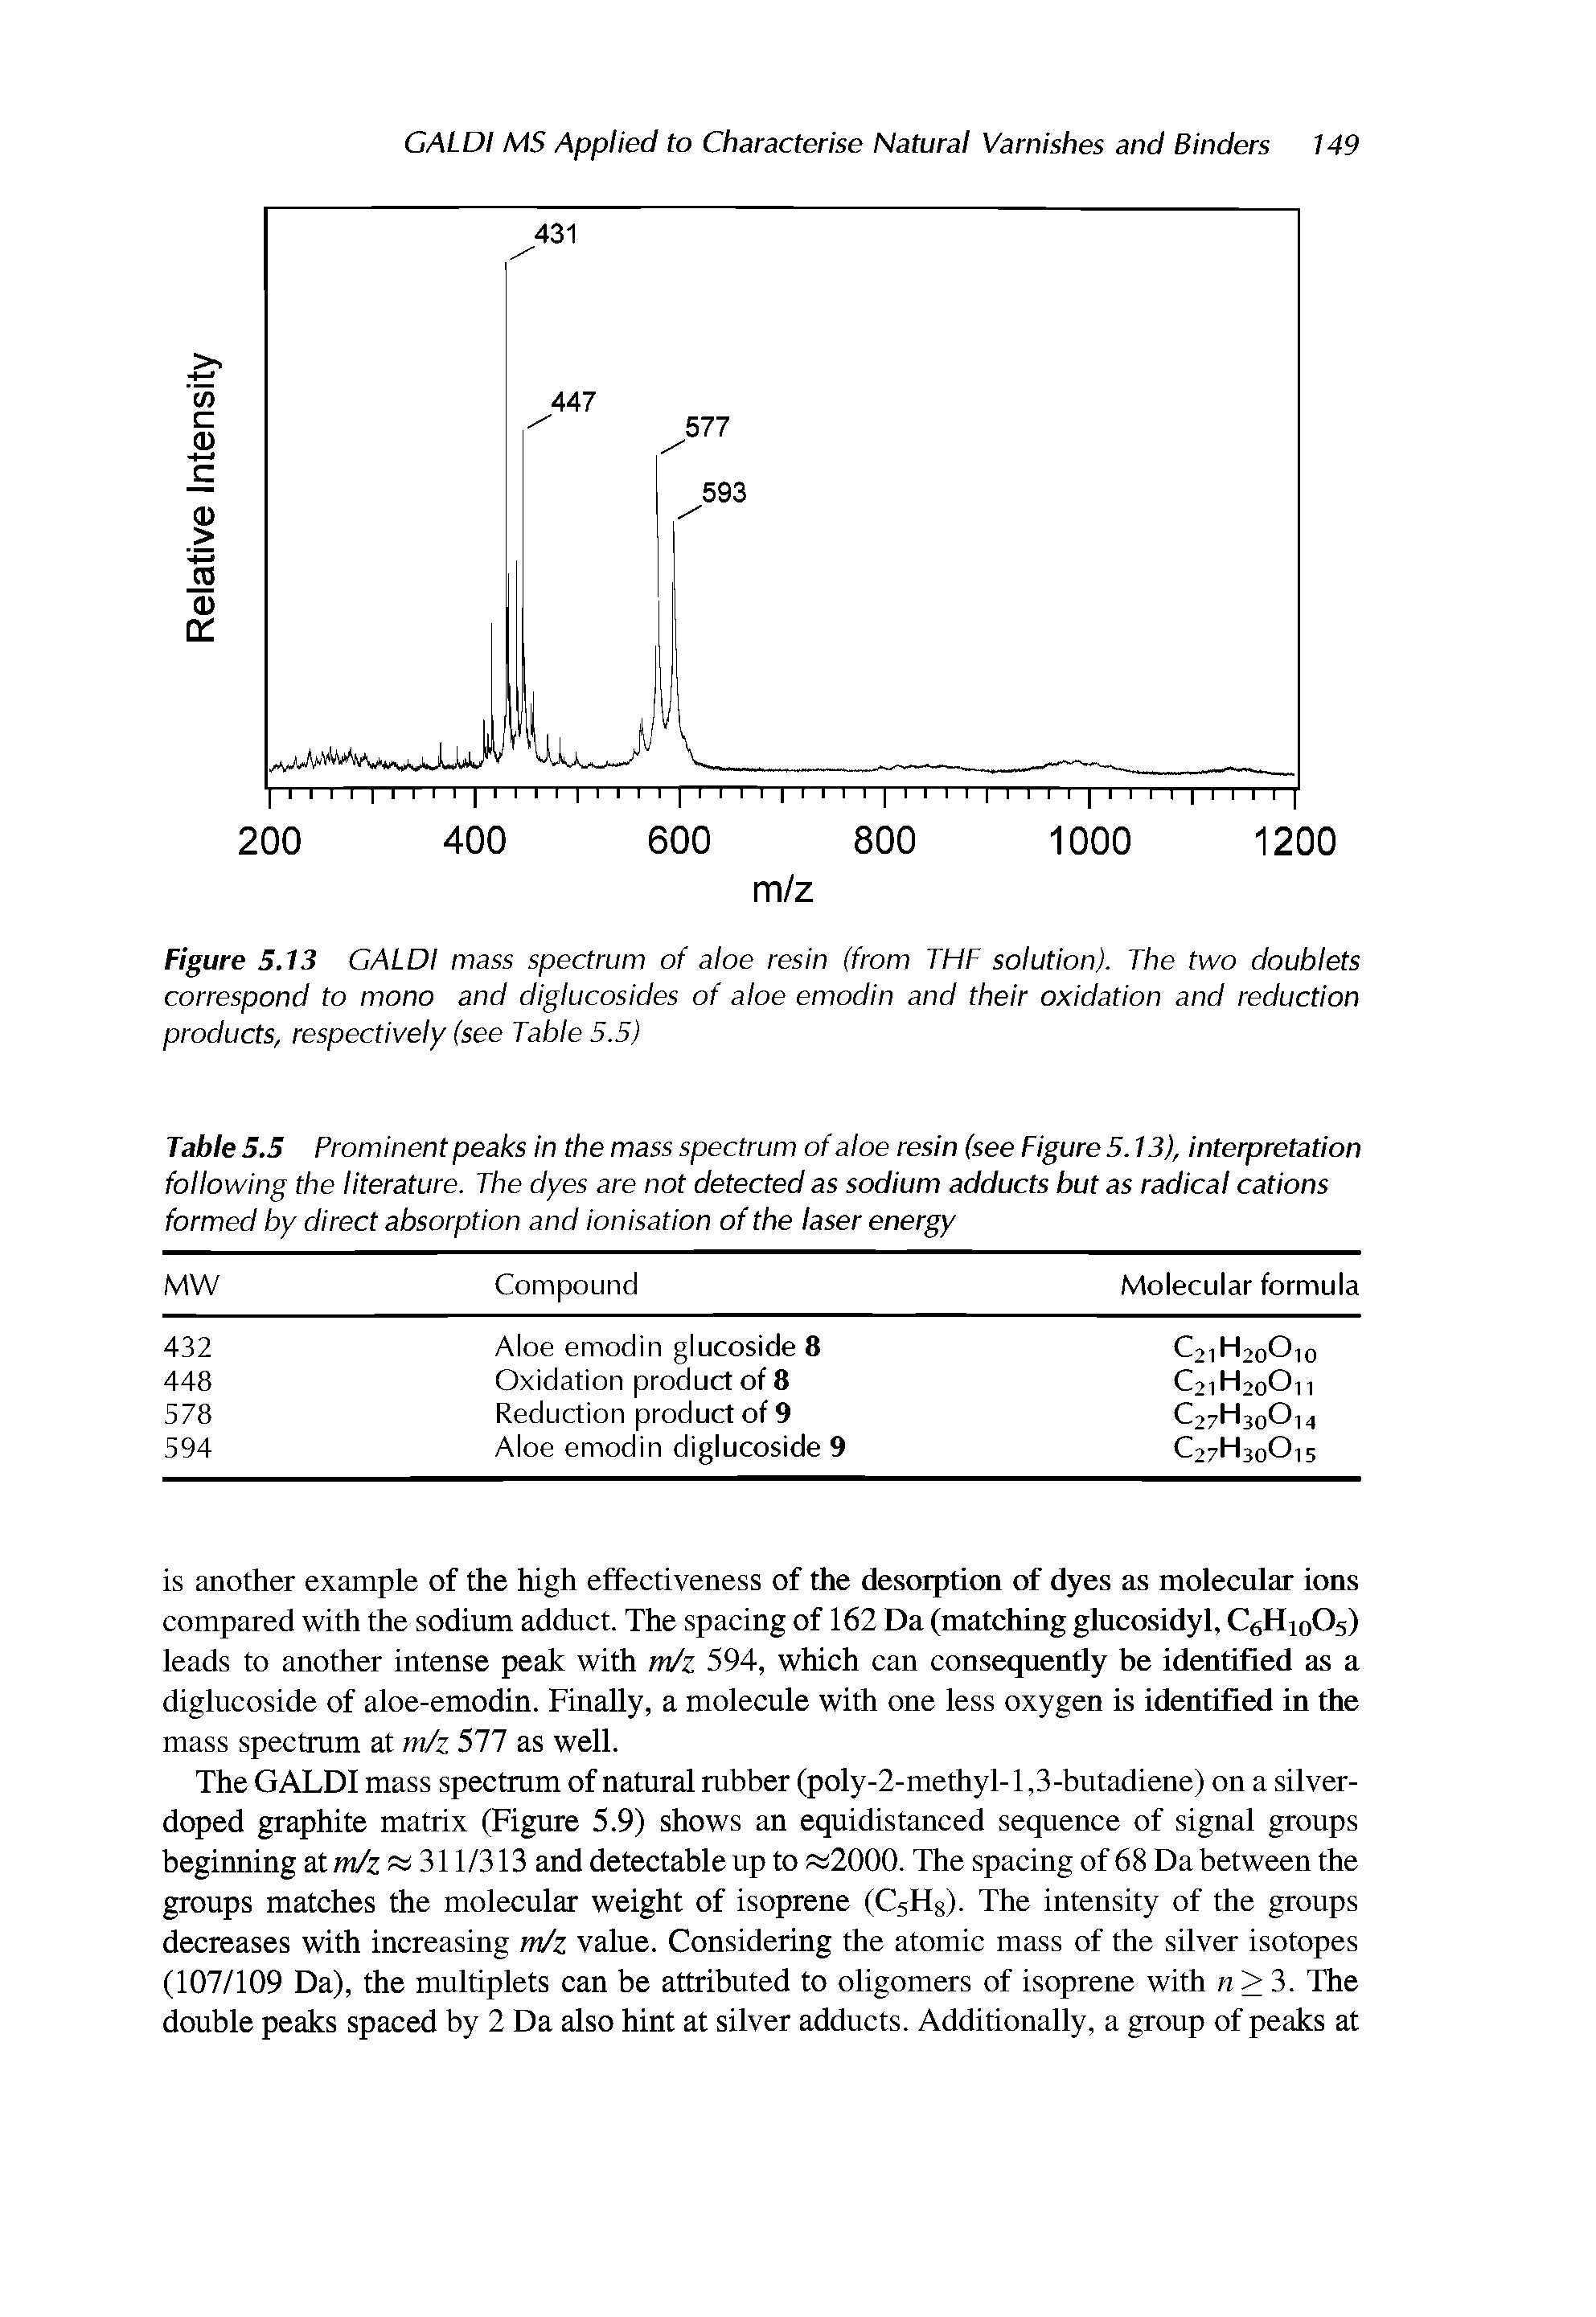 Figure 5.13 GALDI mass spectrum of aloe resin (from THF solution). The two doublets correspond to mono and diglucosides of aloe emodin and their oxidation and reduction products, respectively (see Table 5.5)...